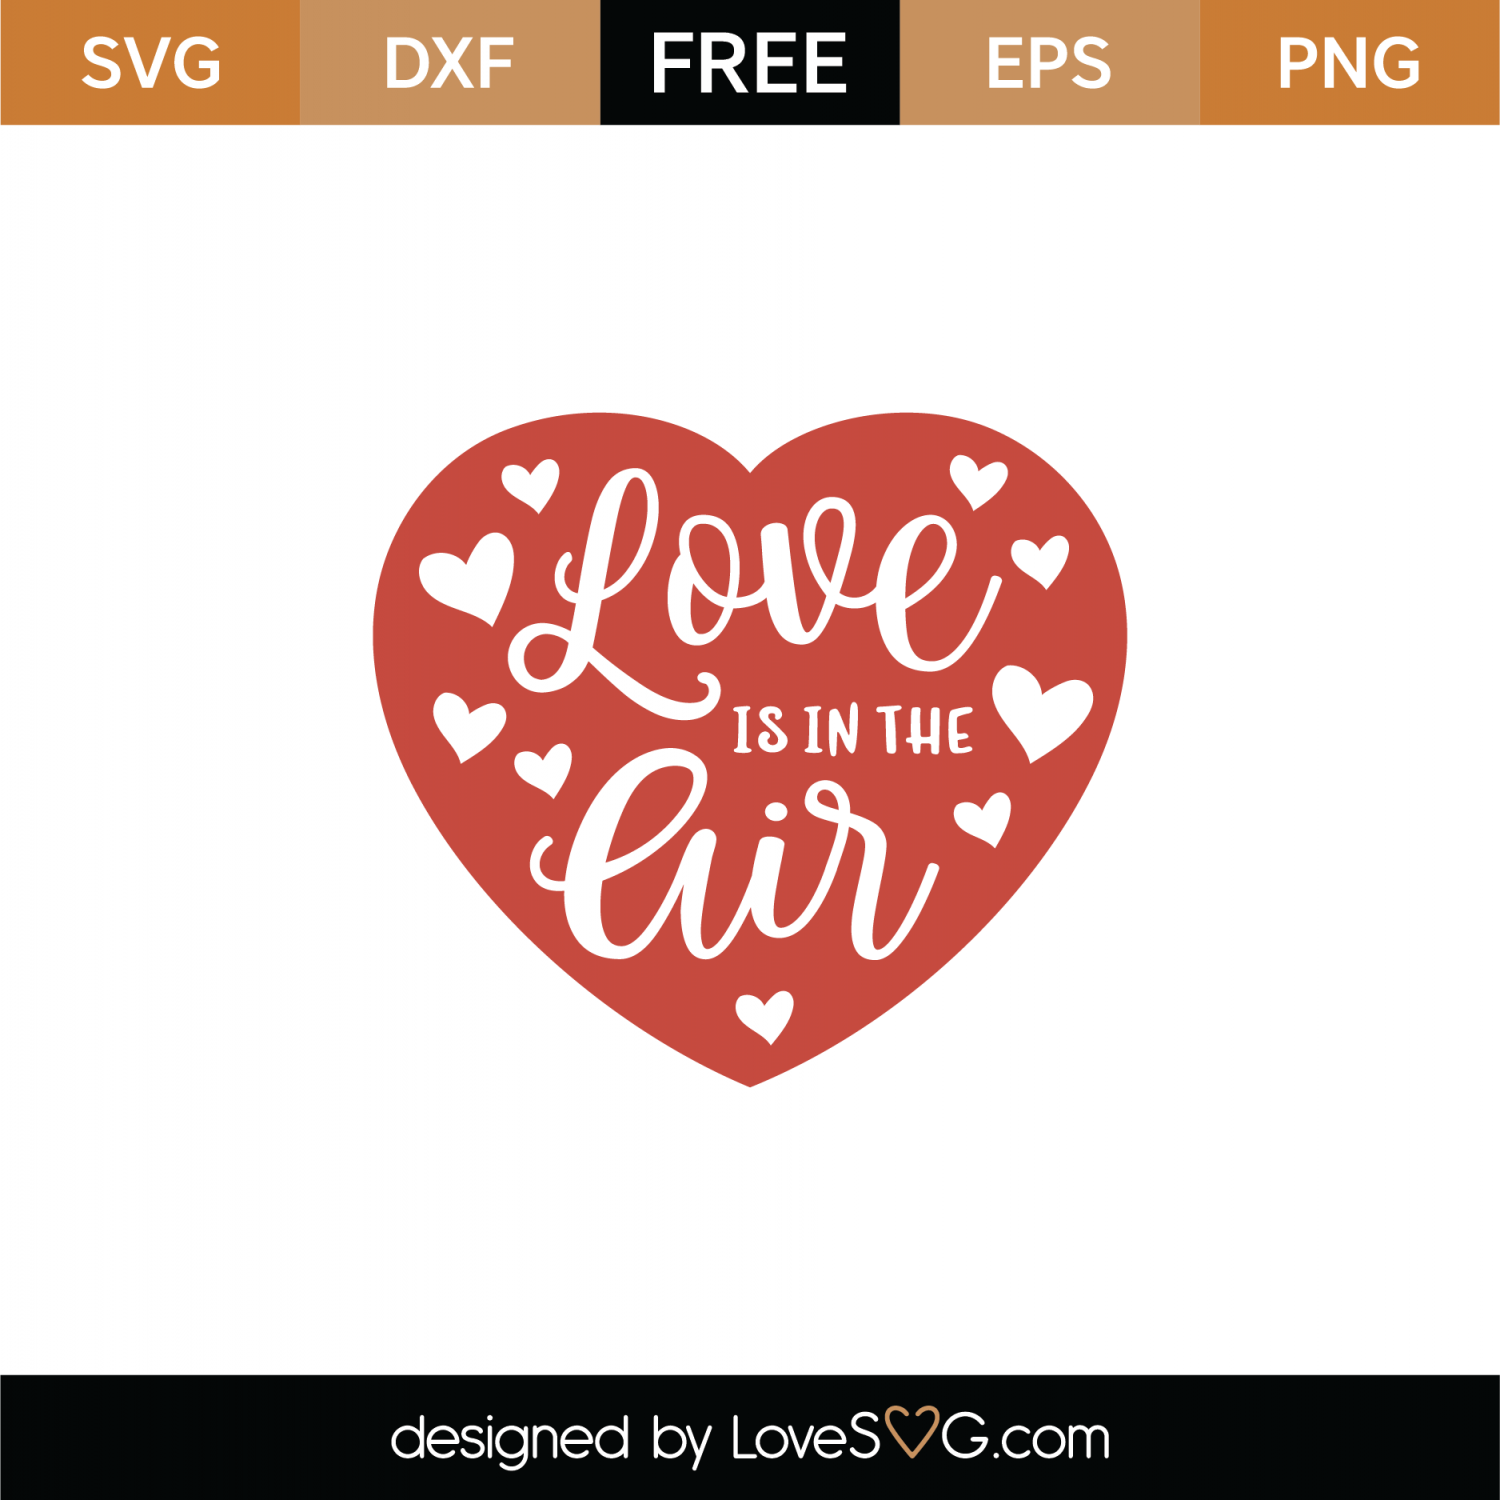 Download Free Love Is In The Air SVG Cut File | Lovesvg.com